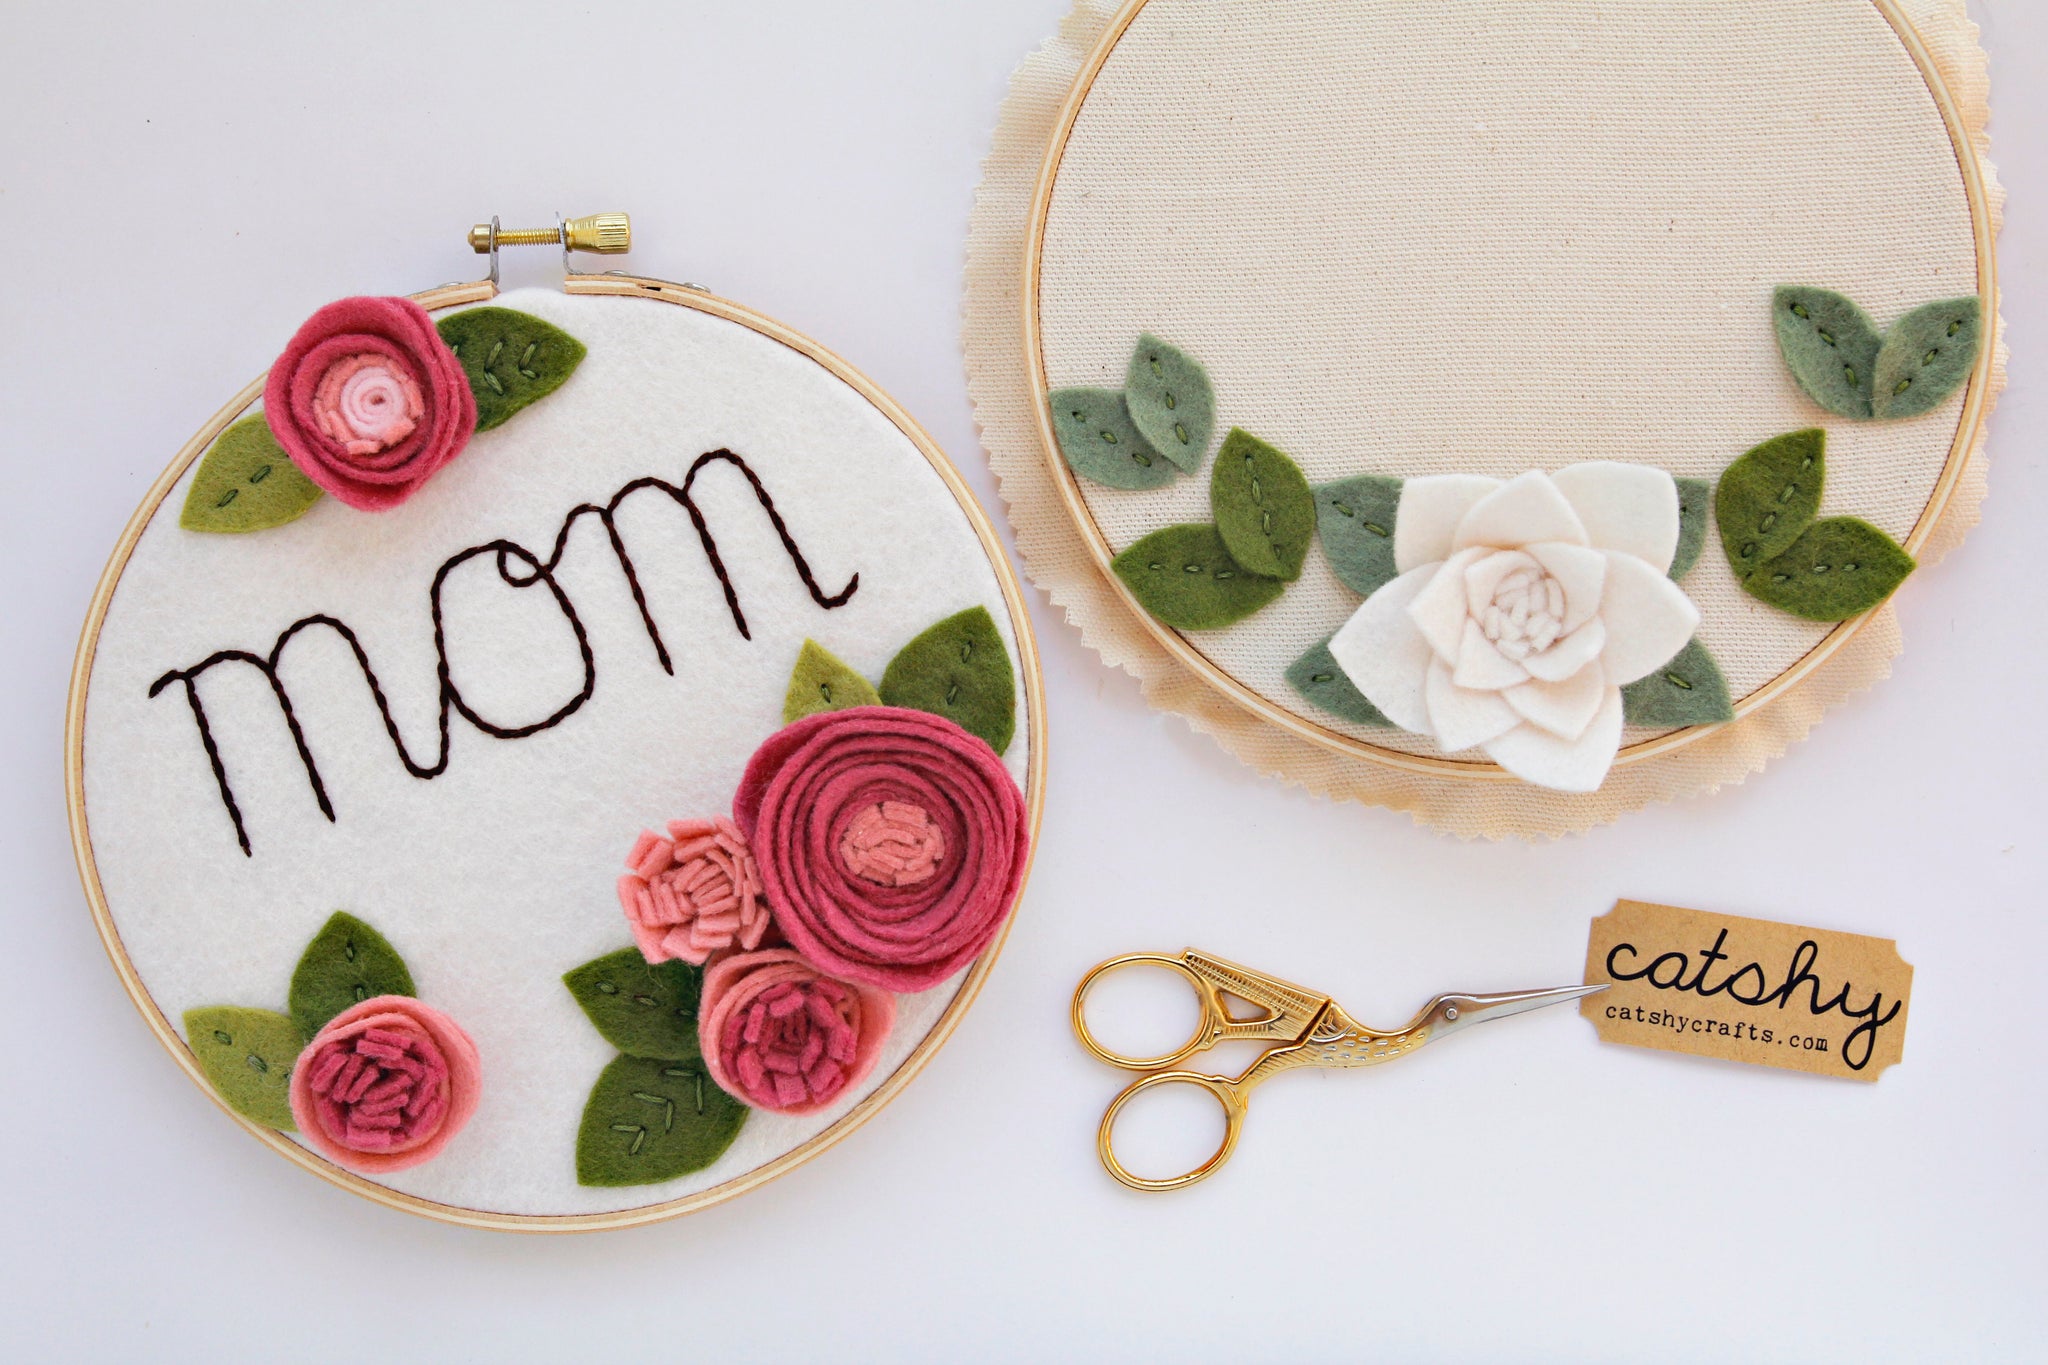 Mom Personalized Embroidery Hoop Art with Pink Flowers